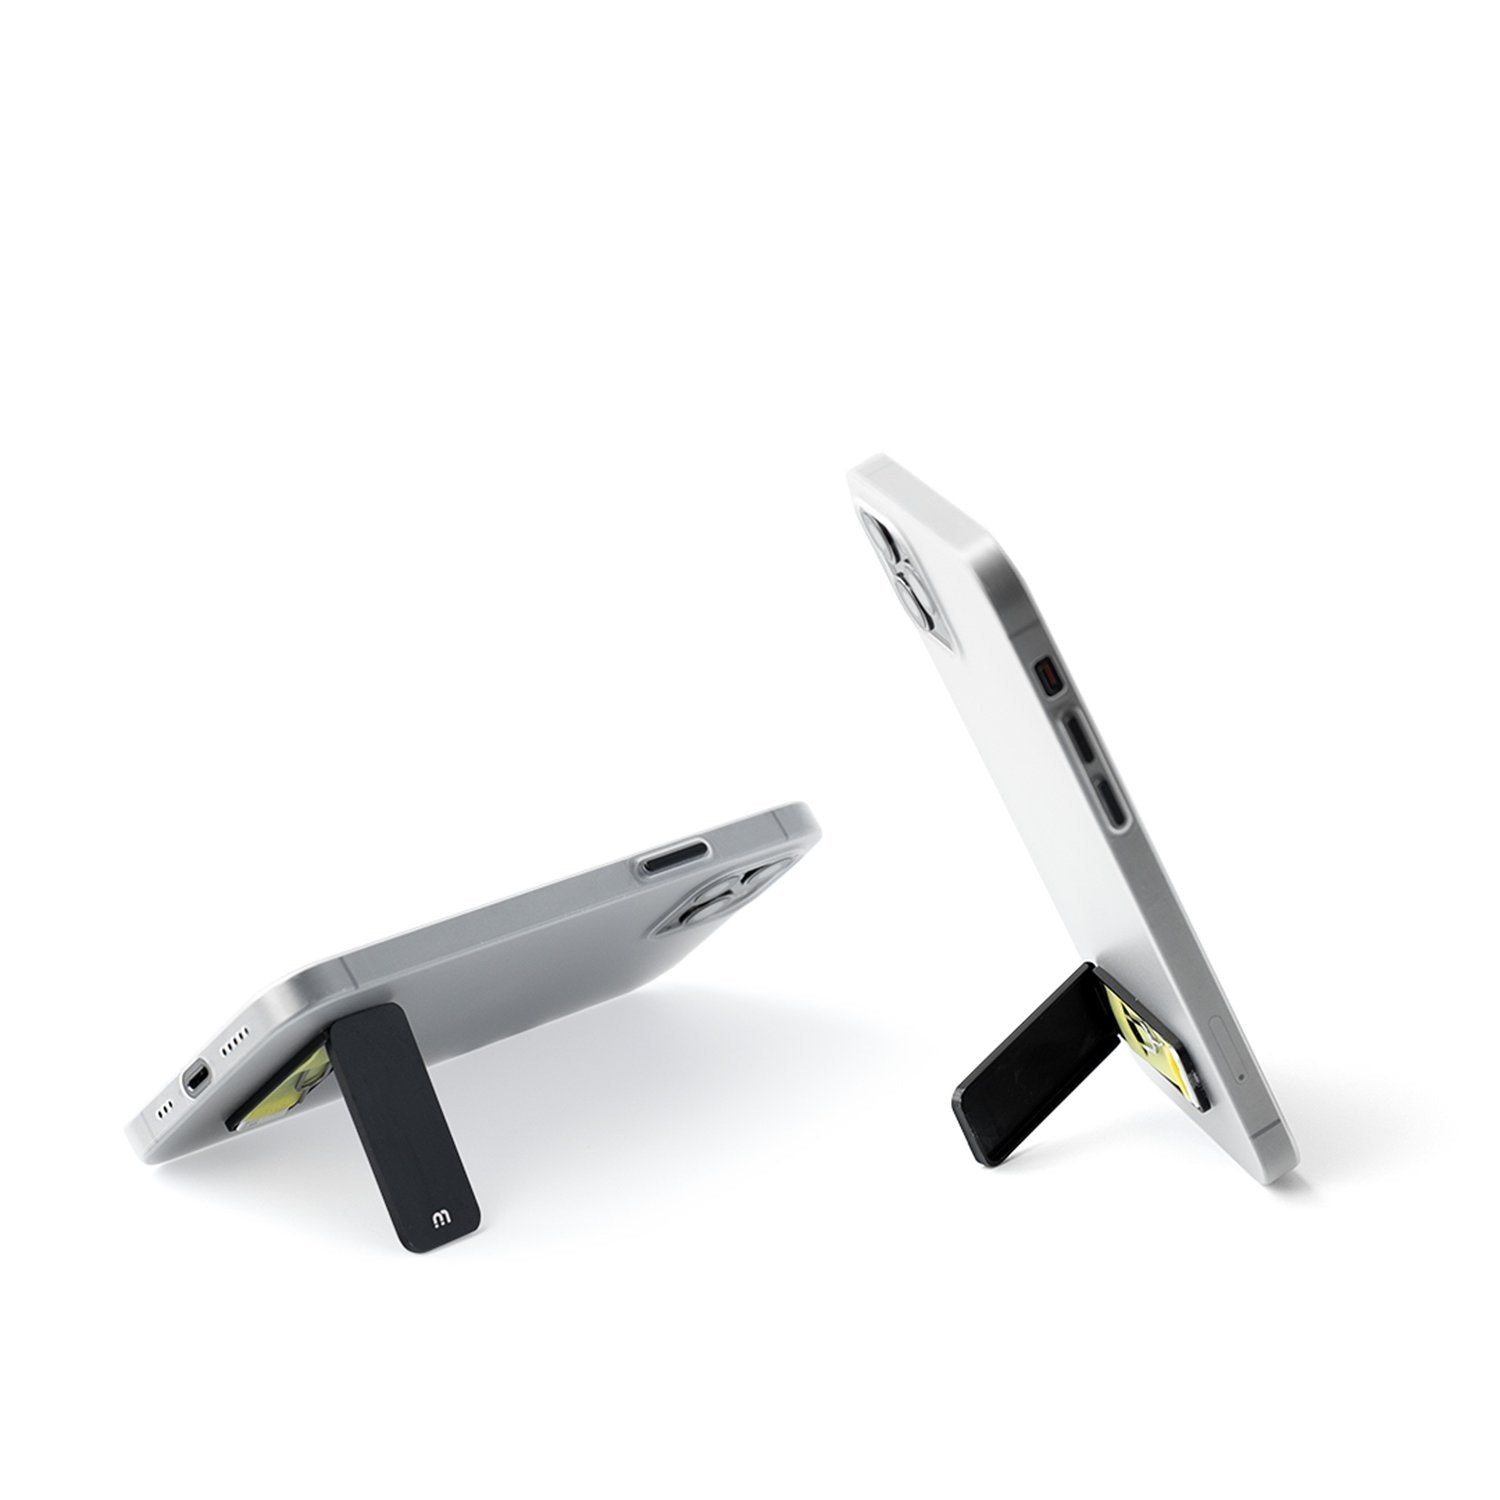 WING slimmest phone stand - HelloMaco - Storming Gravity